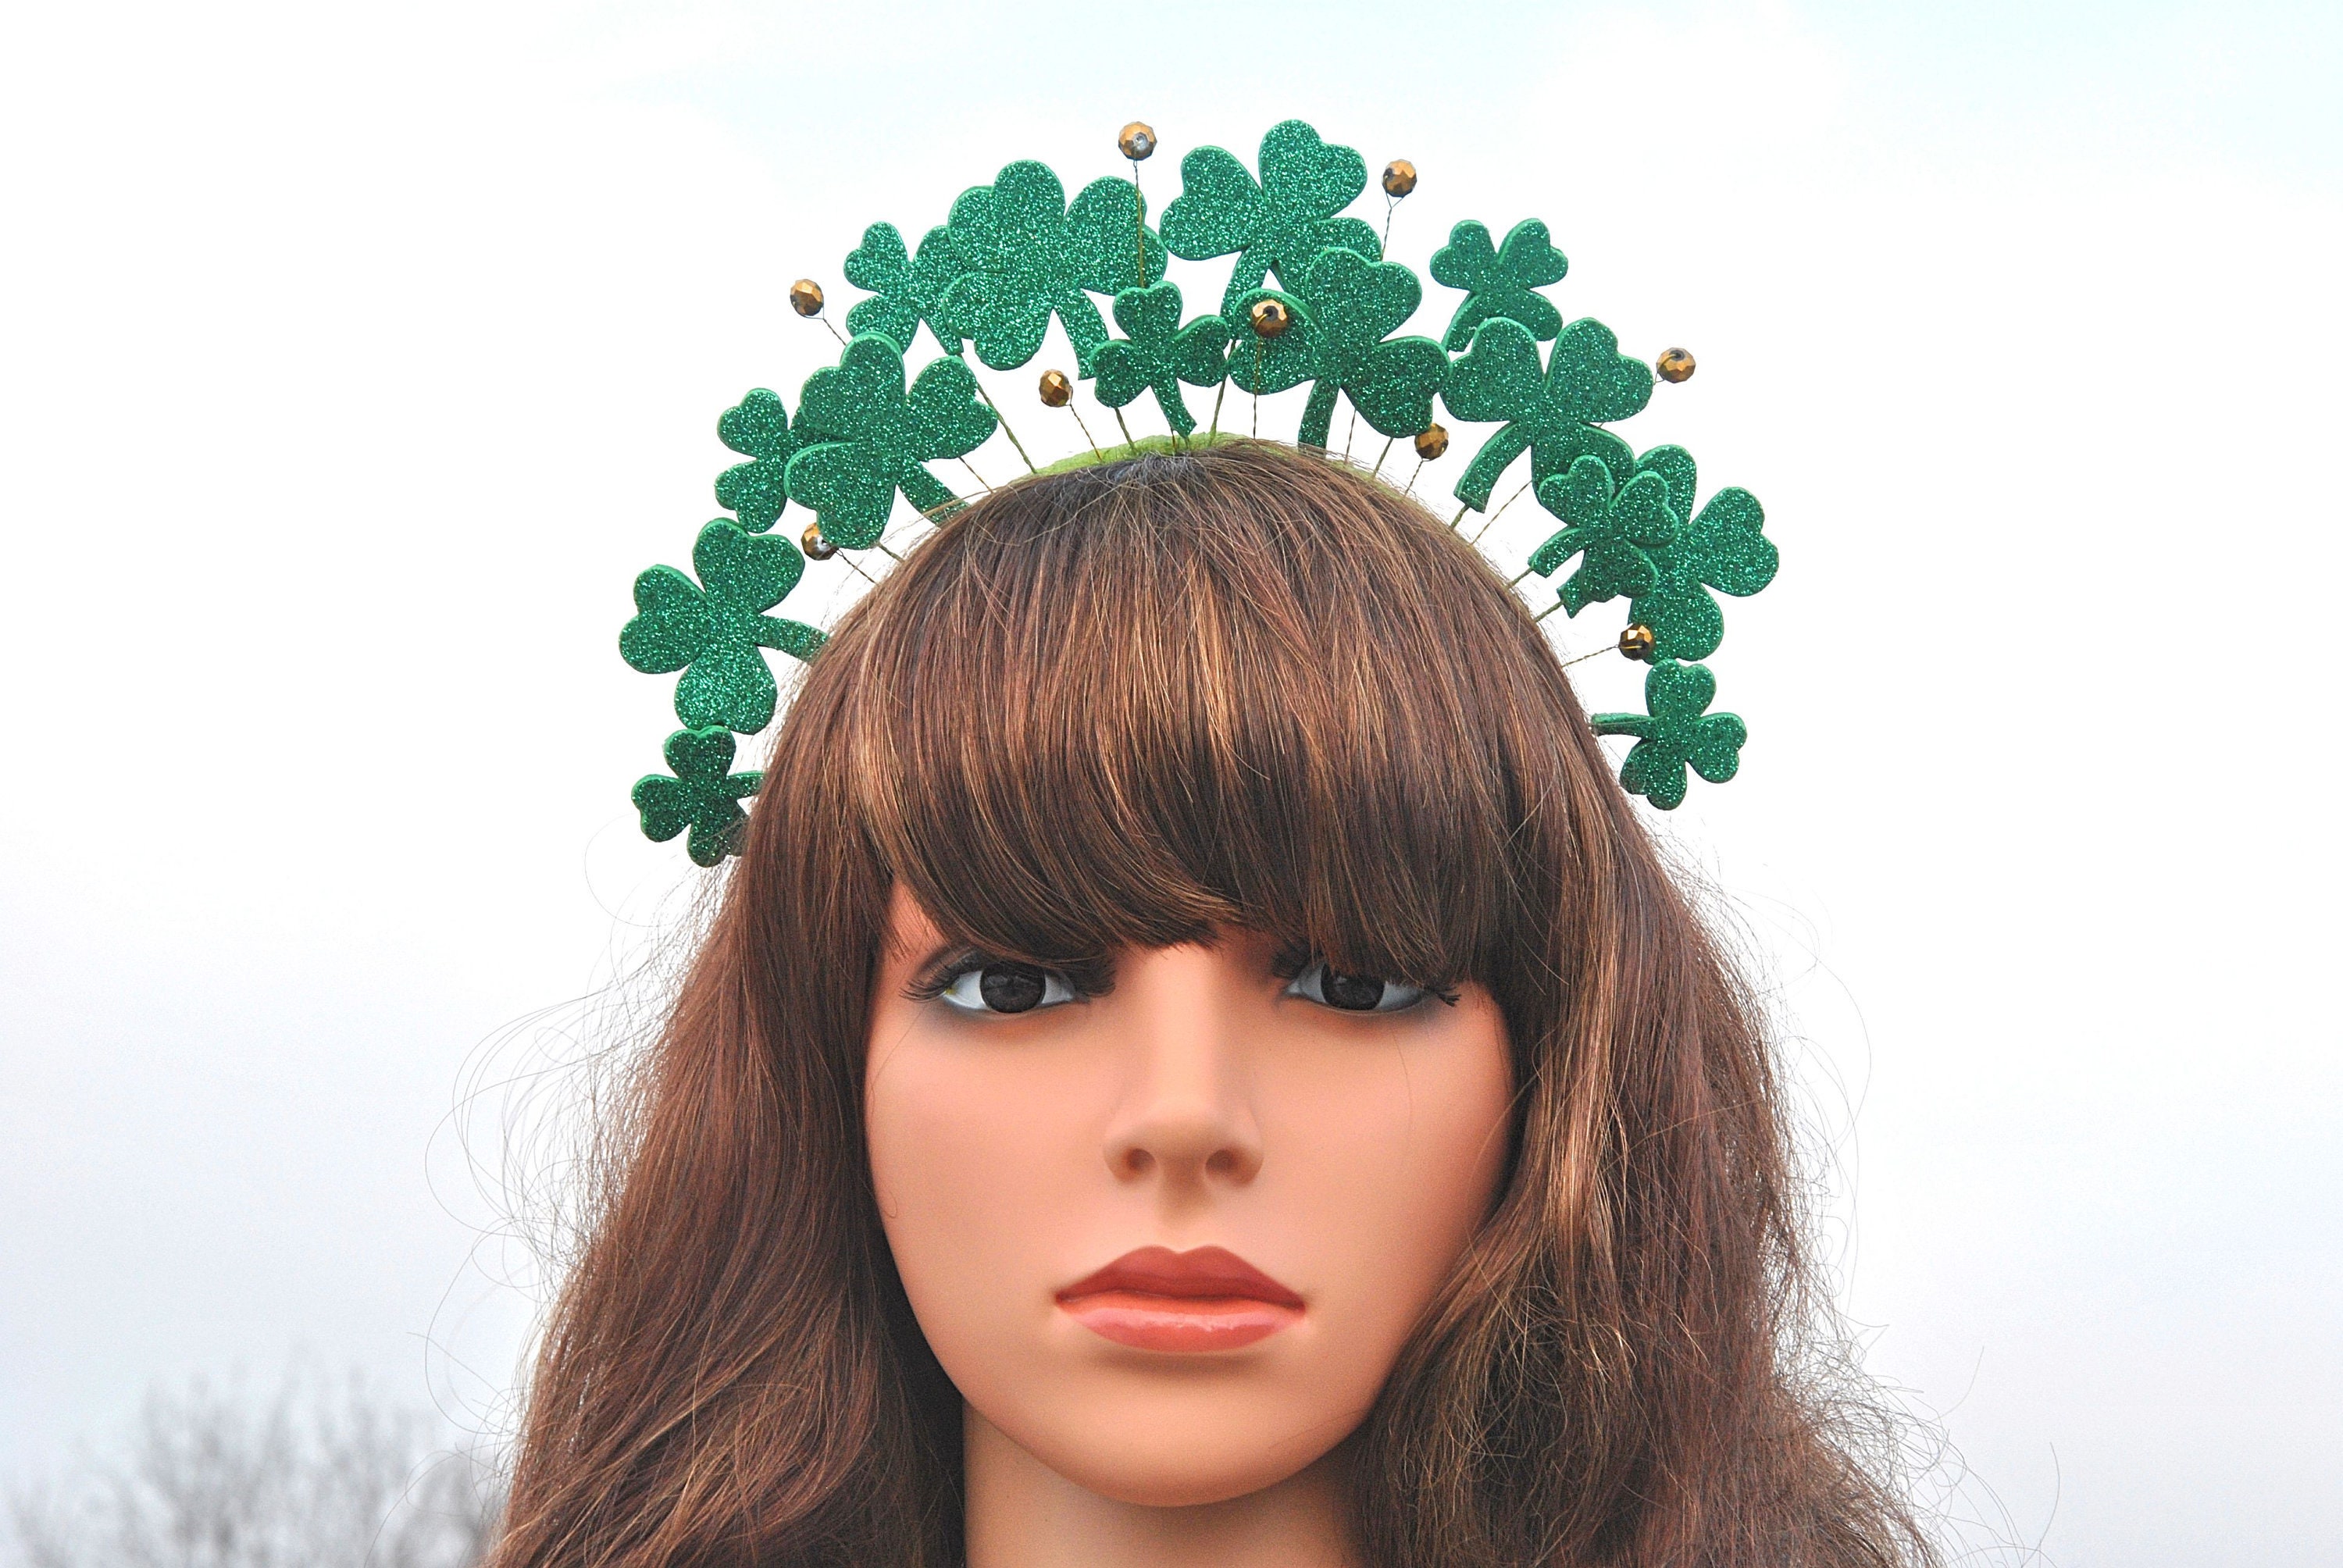 Boao 12 Pack St Patricks Day Shamrock Crown Craft Kit Green Felt Head Crown with Decorative Parts and Elastic Rope for St Patricks Day Party Costume Decorations 